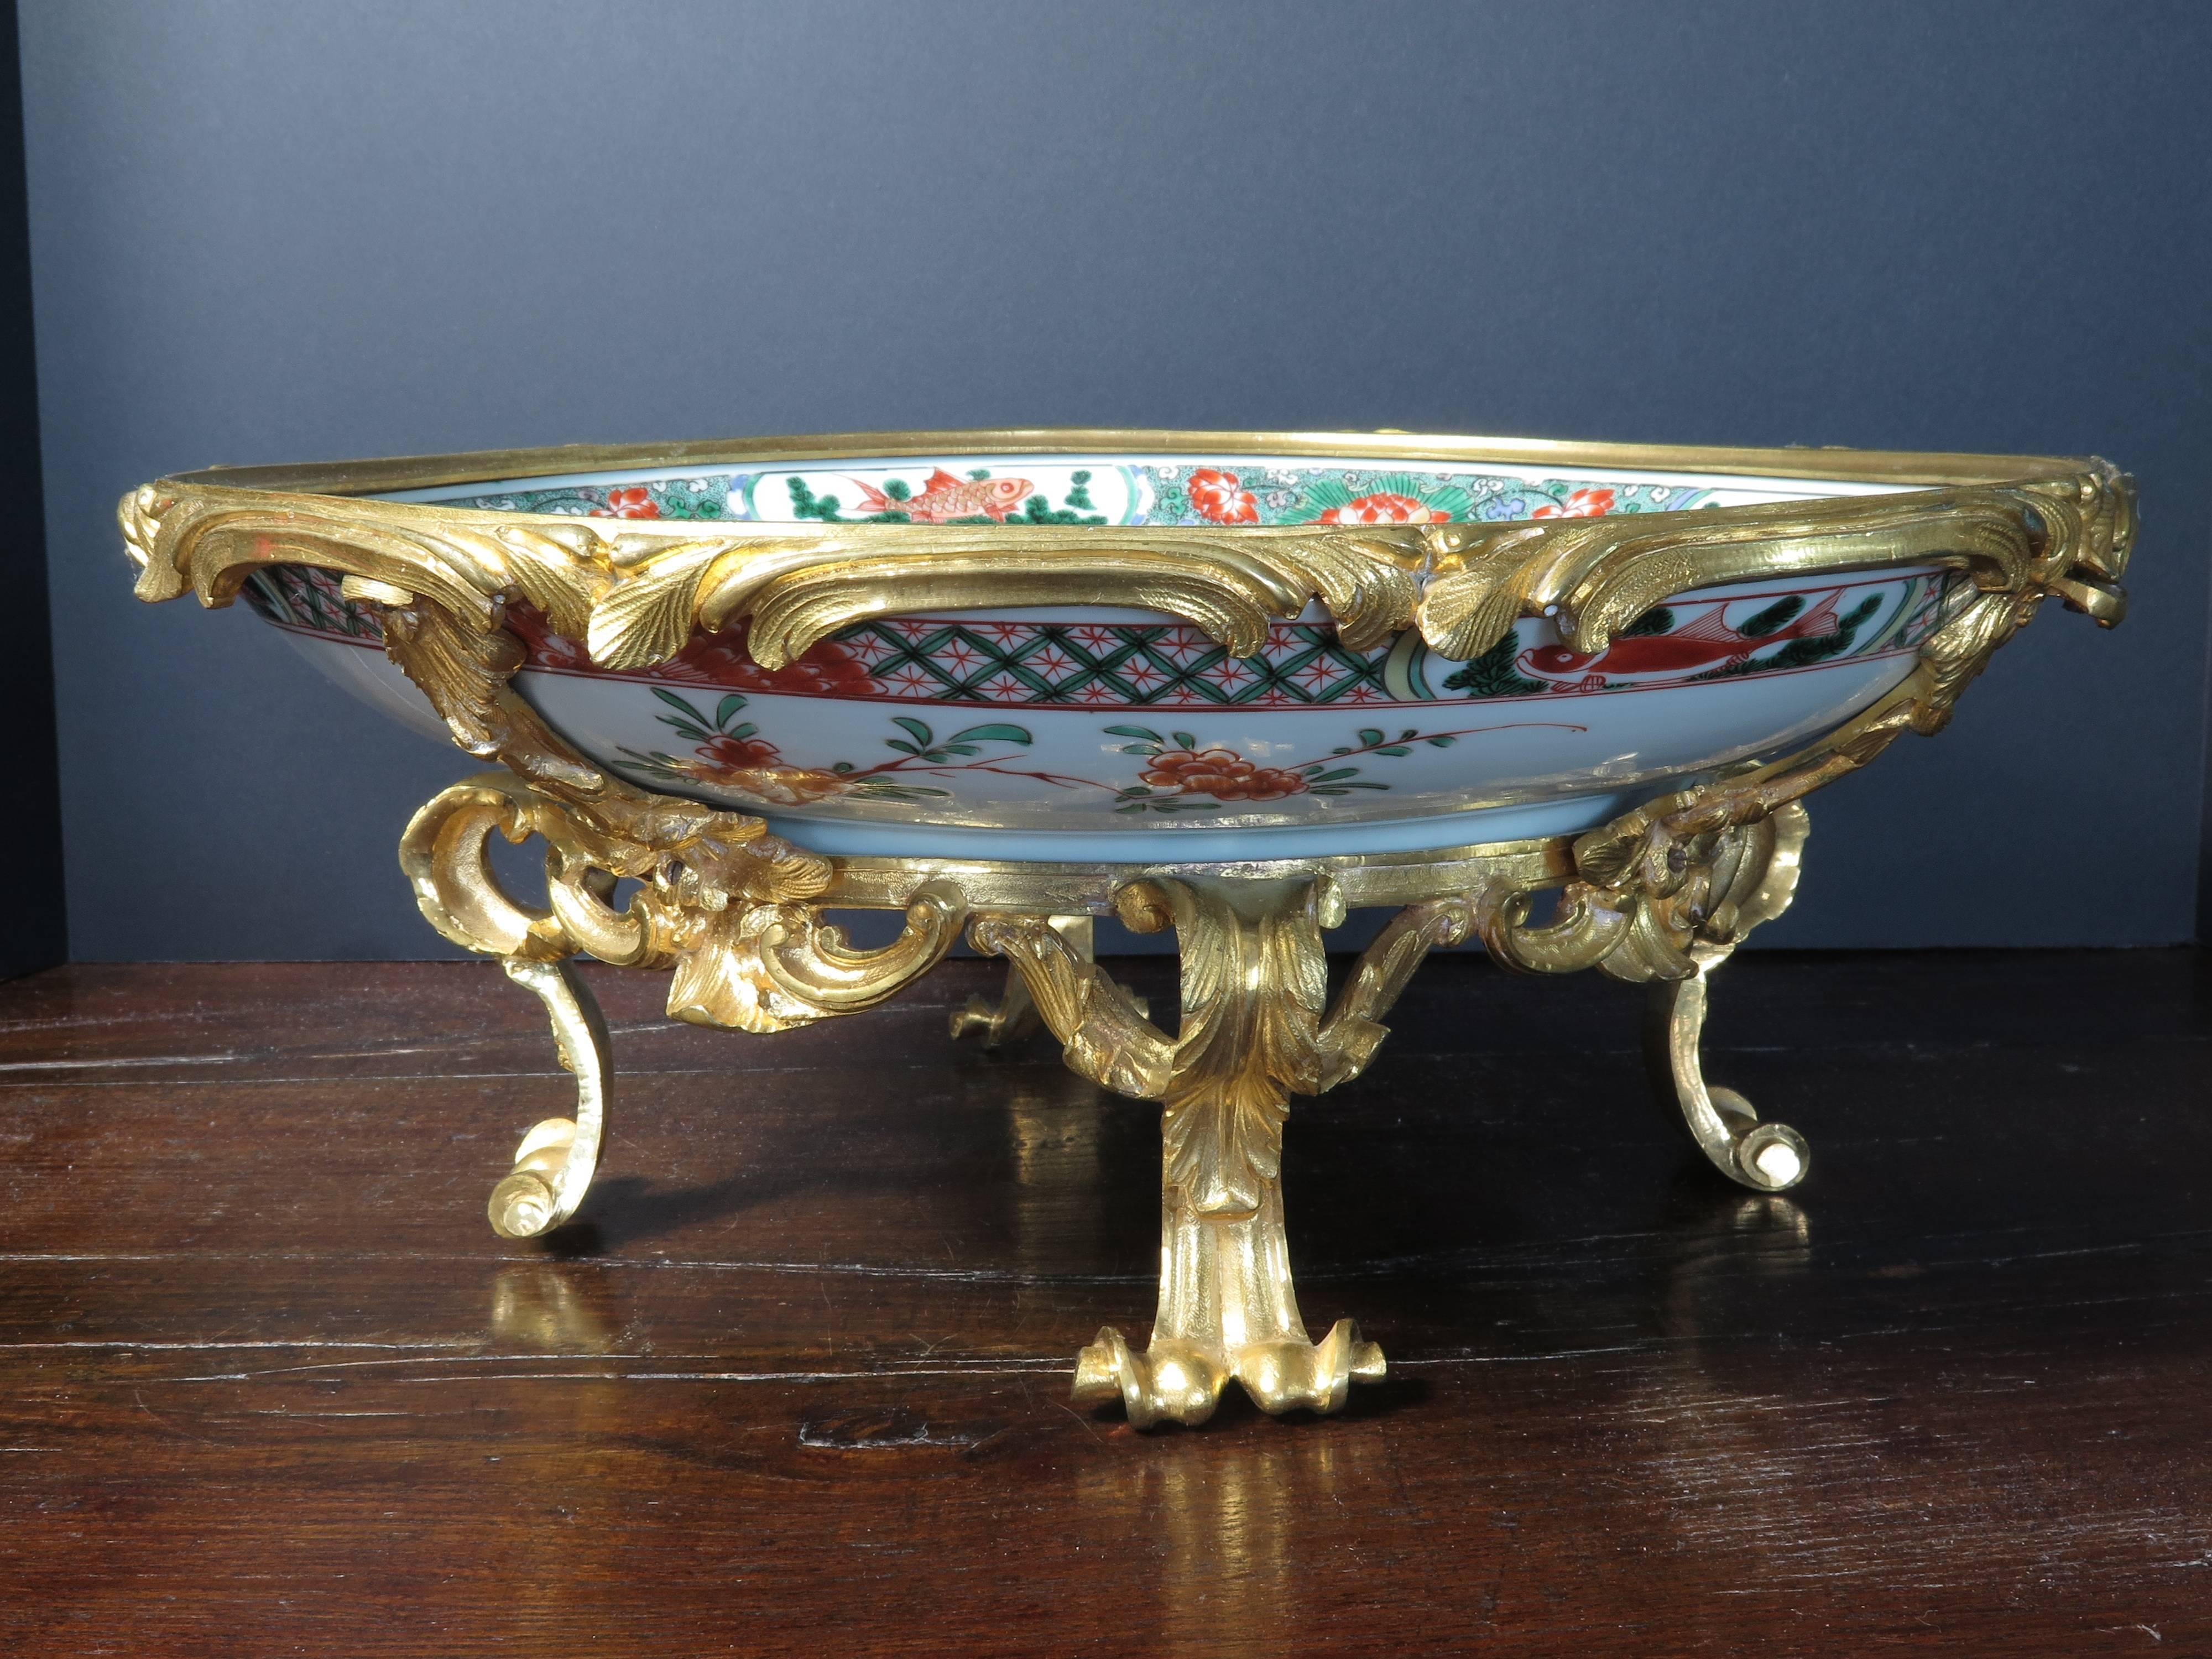 This gorgeous centerpiece has been created by the fortuitous marriage of a 17th century, Kangxi Period Famille verte enameled porcelain charger, with a set of custom 19th century French gilt bronze ormolu mounts.

The Chinese porcelain charger is